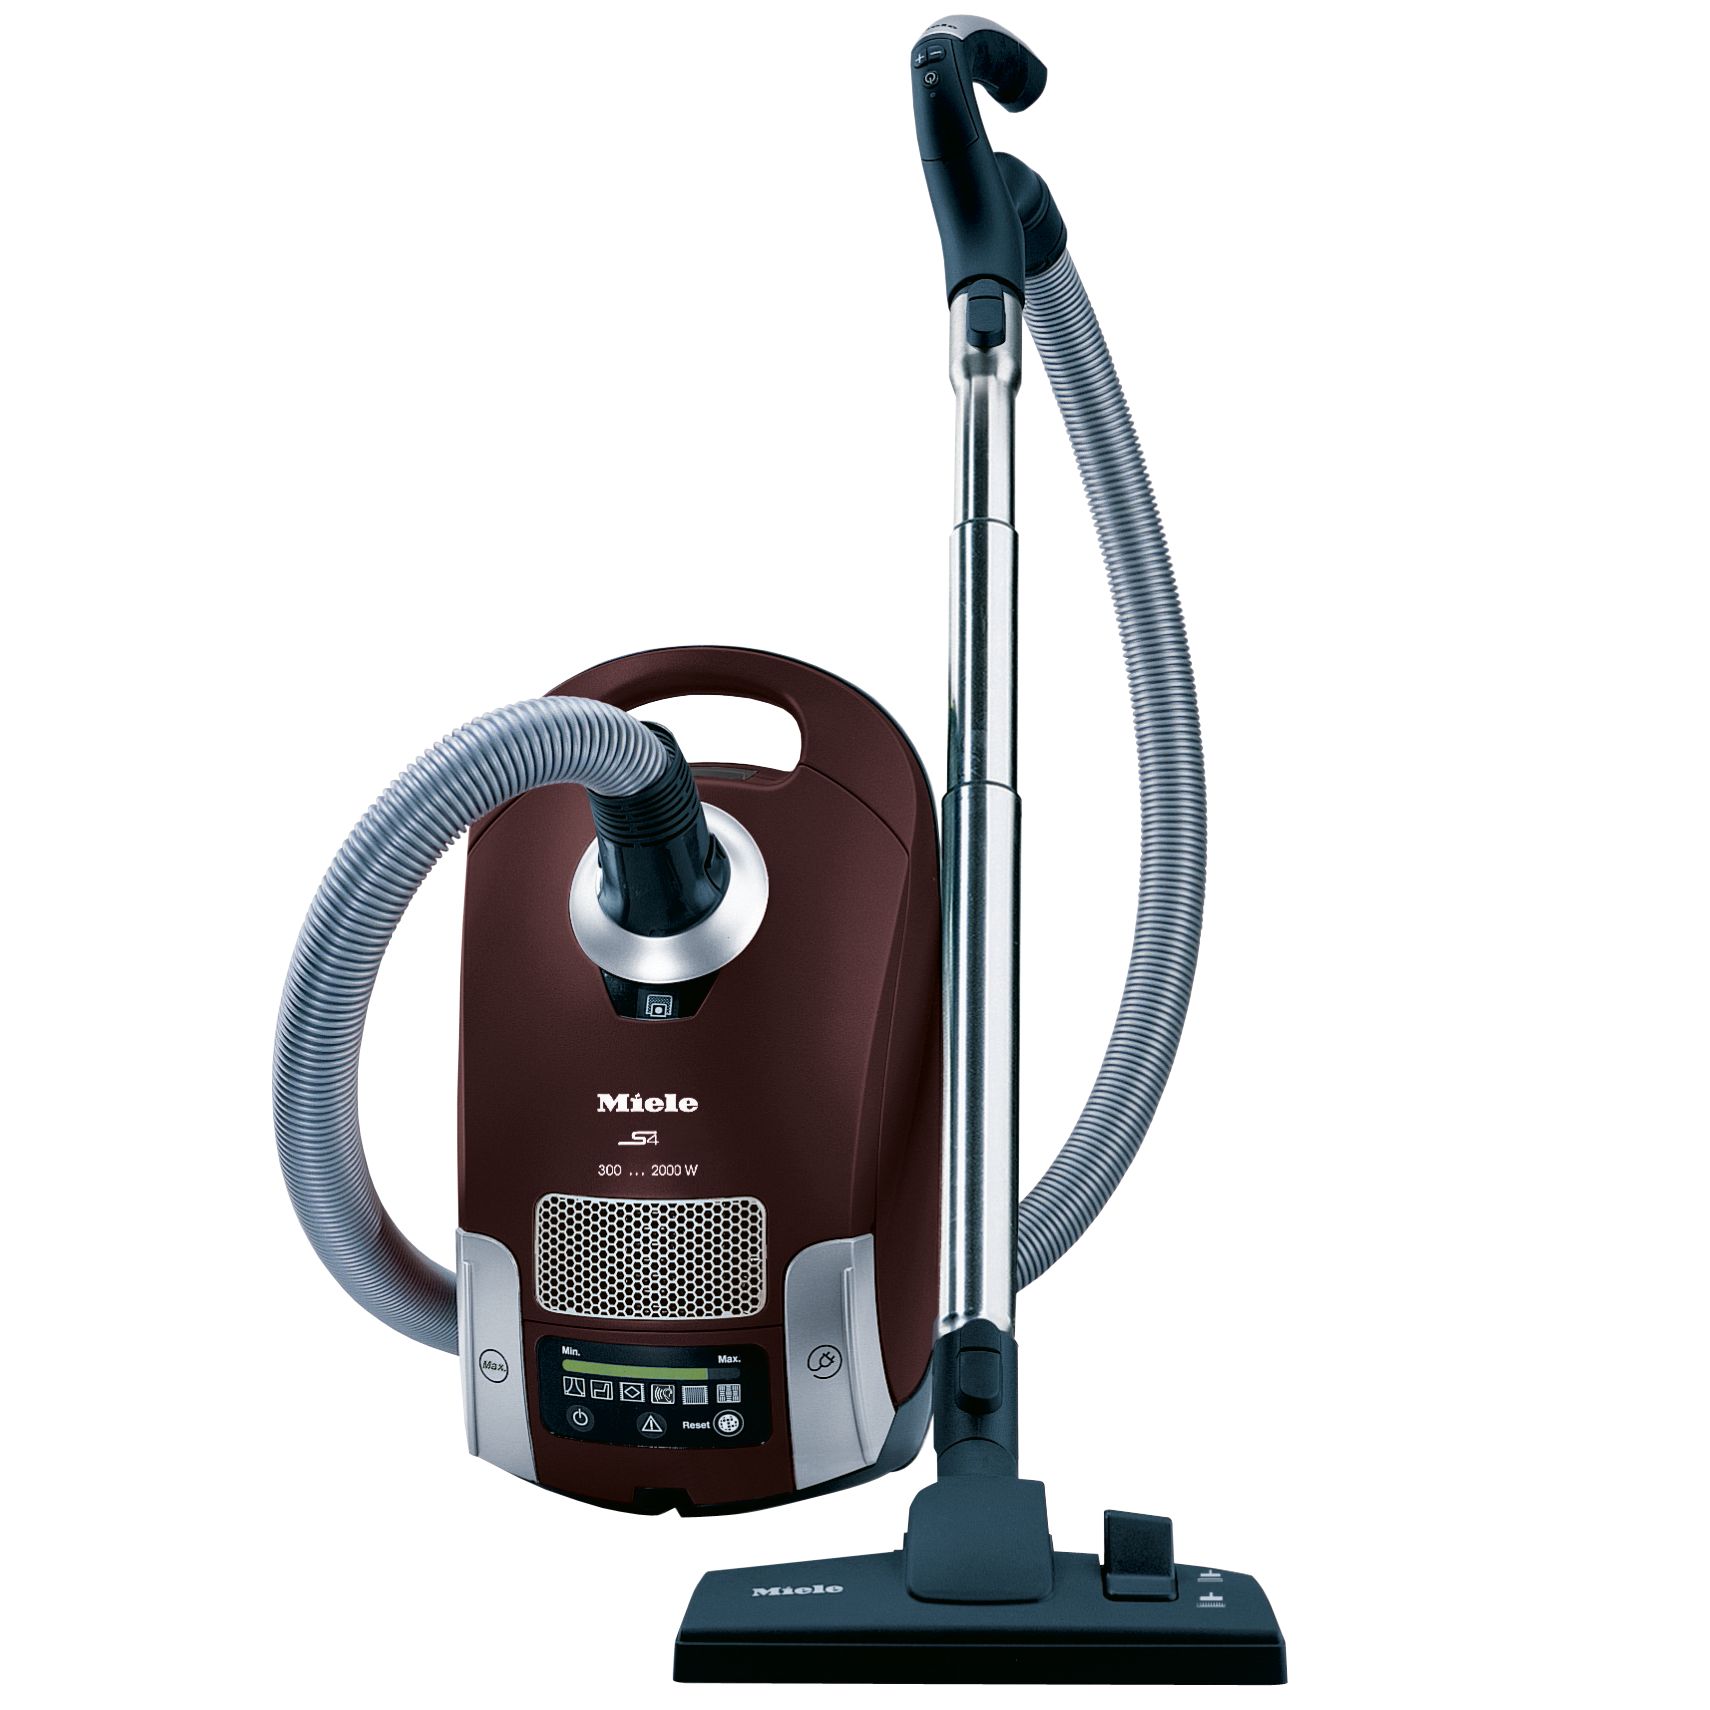 Miele S4782 Remote Control HEPA Cylinder Vacuum Cleaner, Midnight Purple at John Lewis